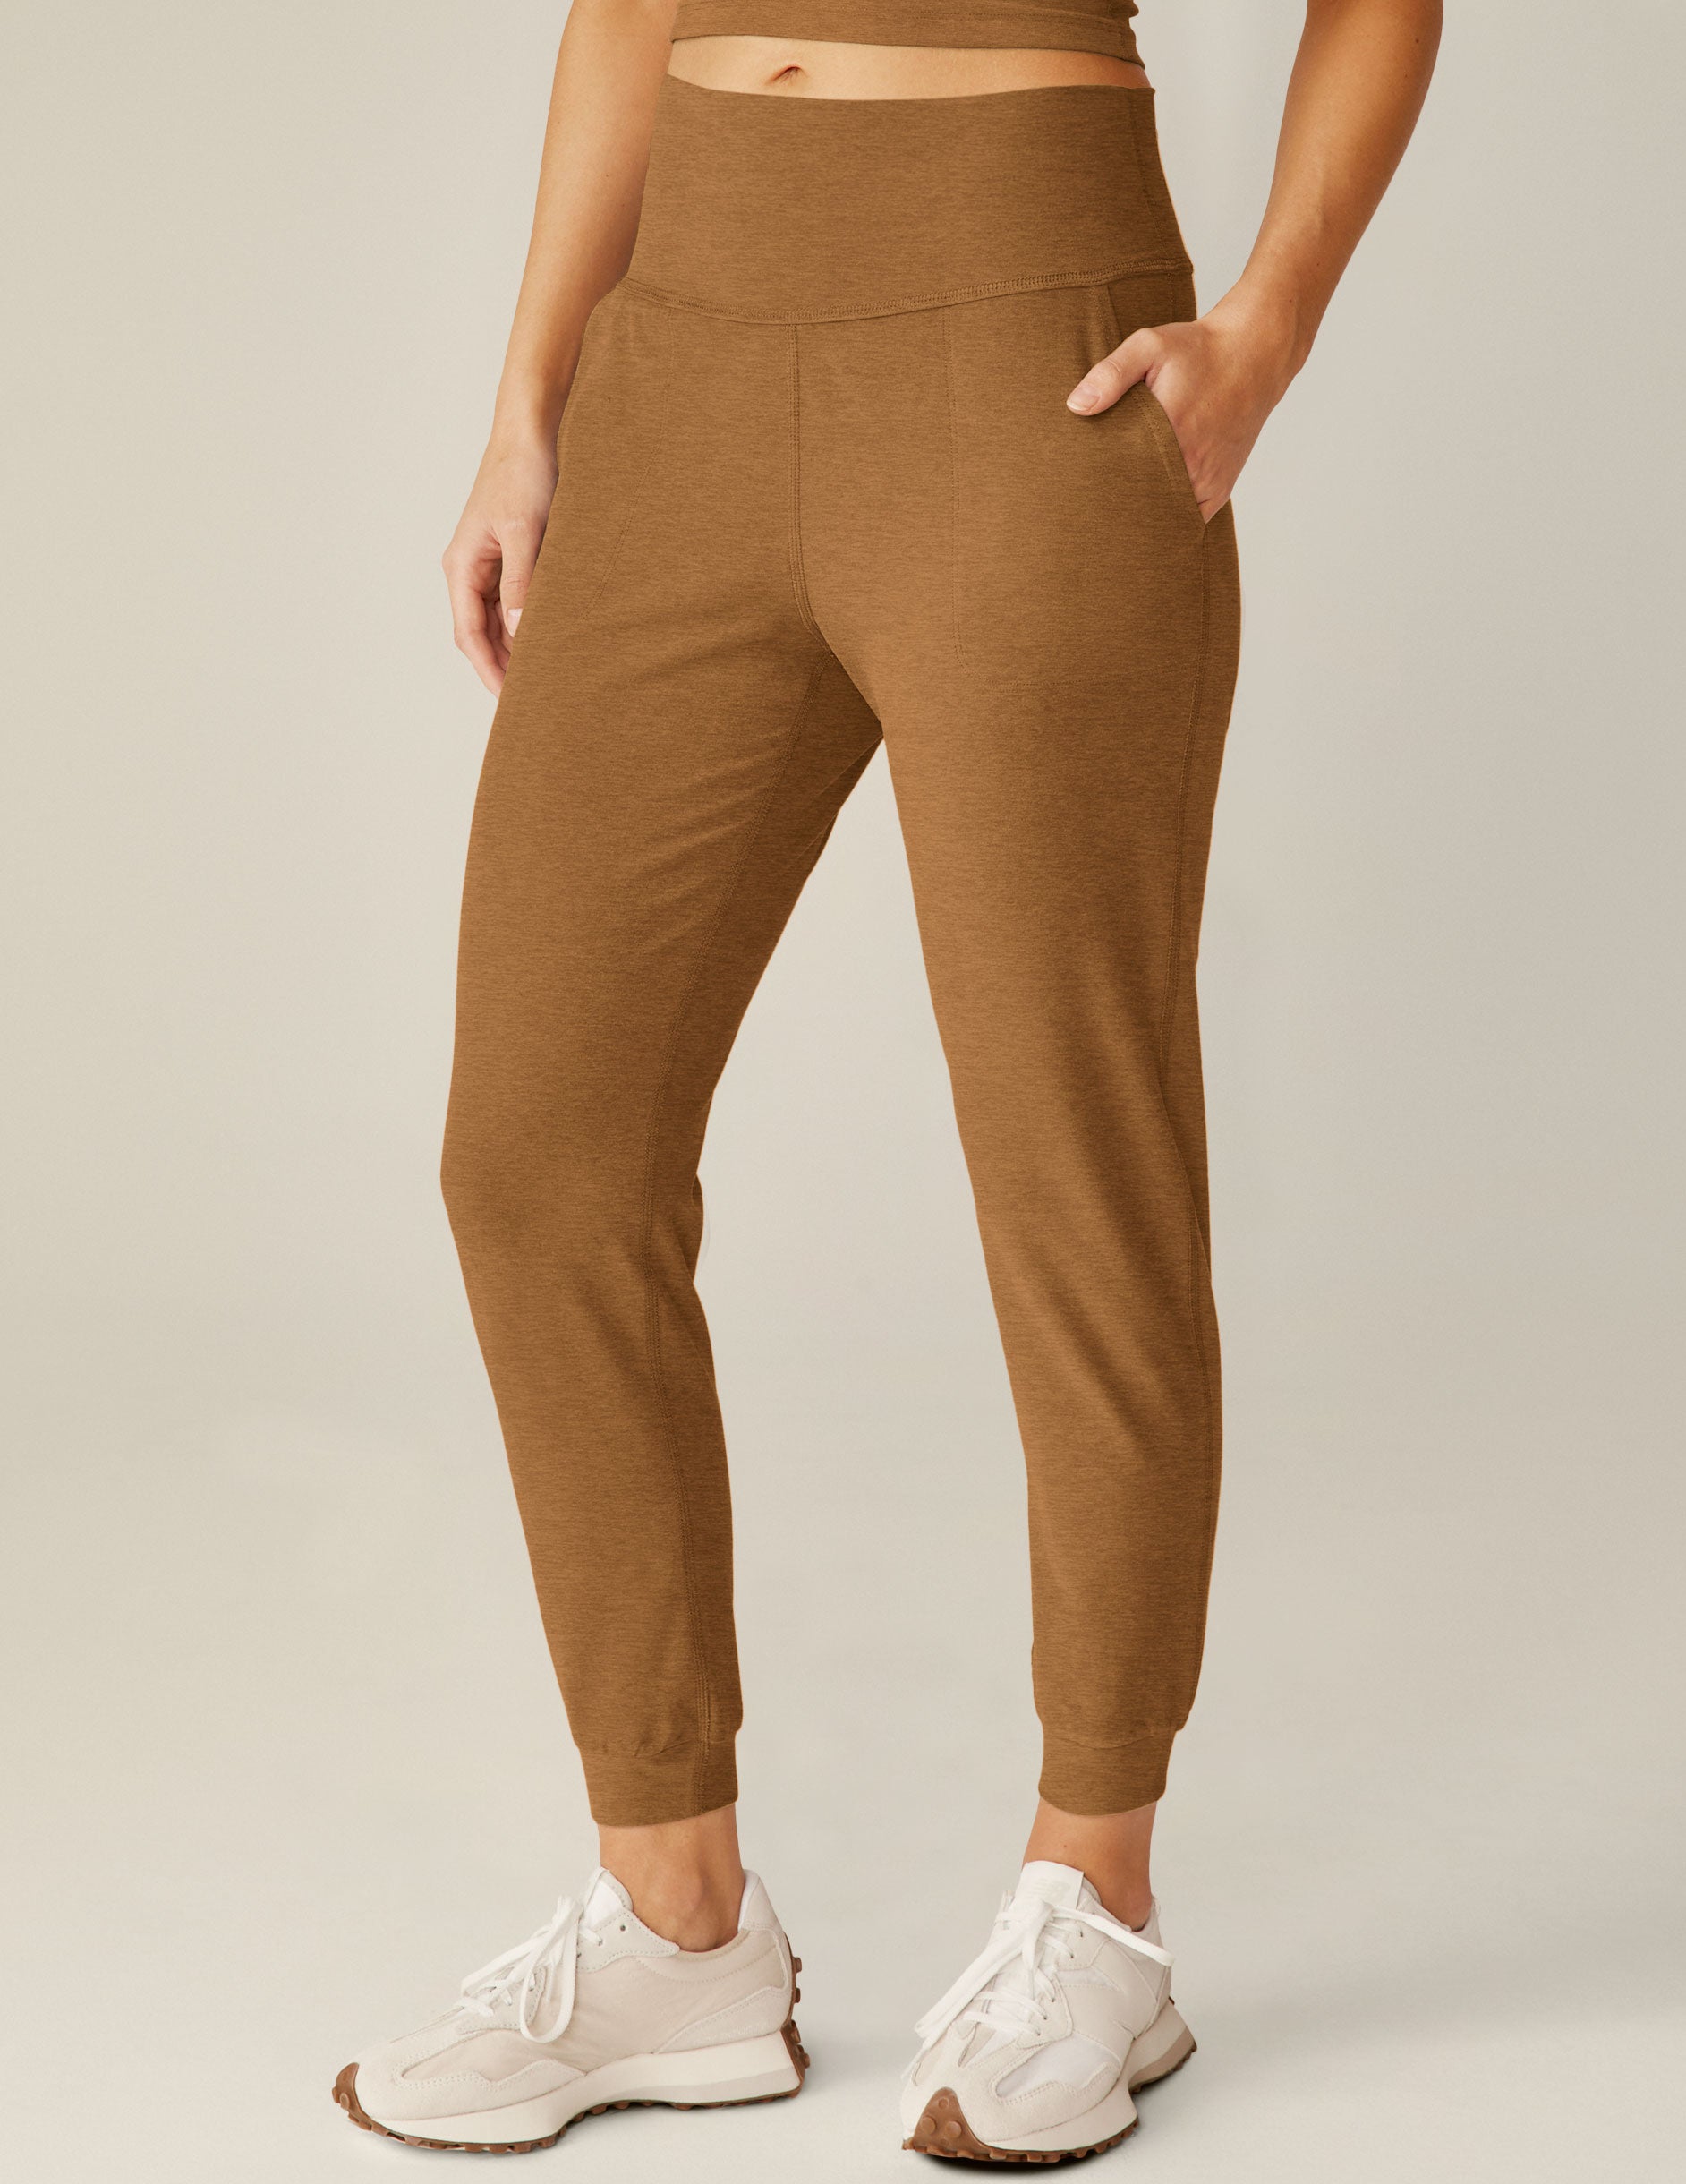 Women's Everyday Soft Ultra High-Rise Leggings - All in Motion Brown XXL 1  ct